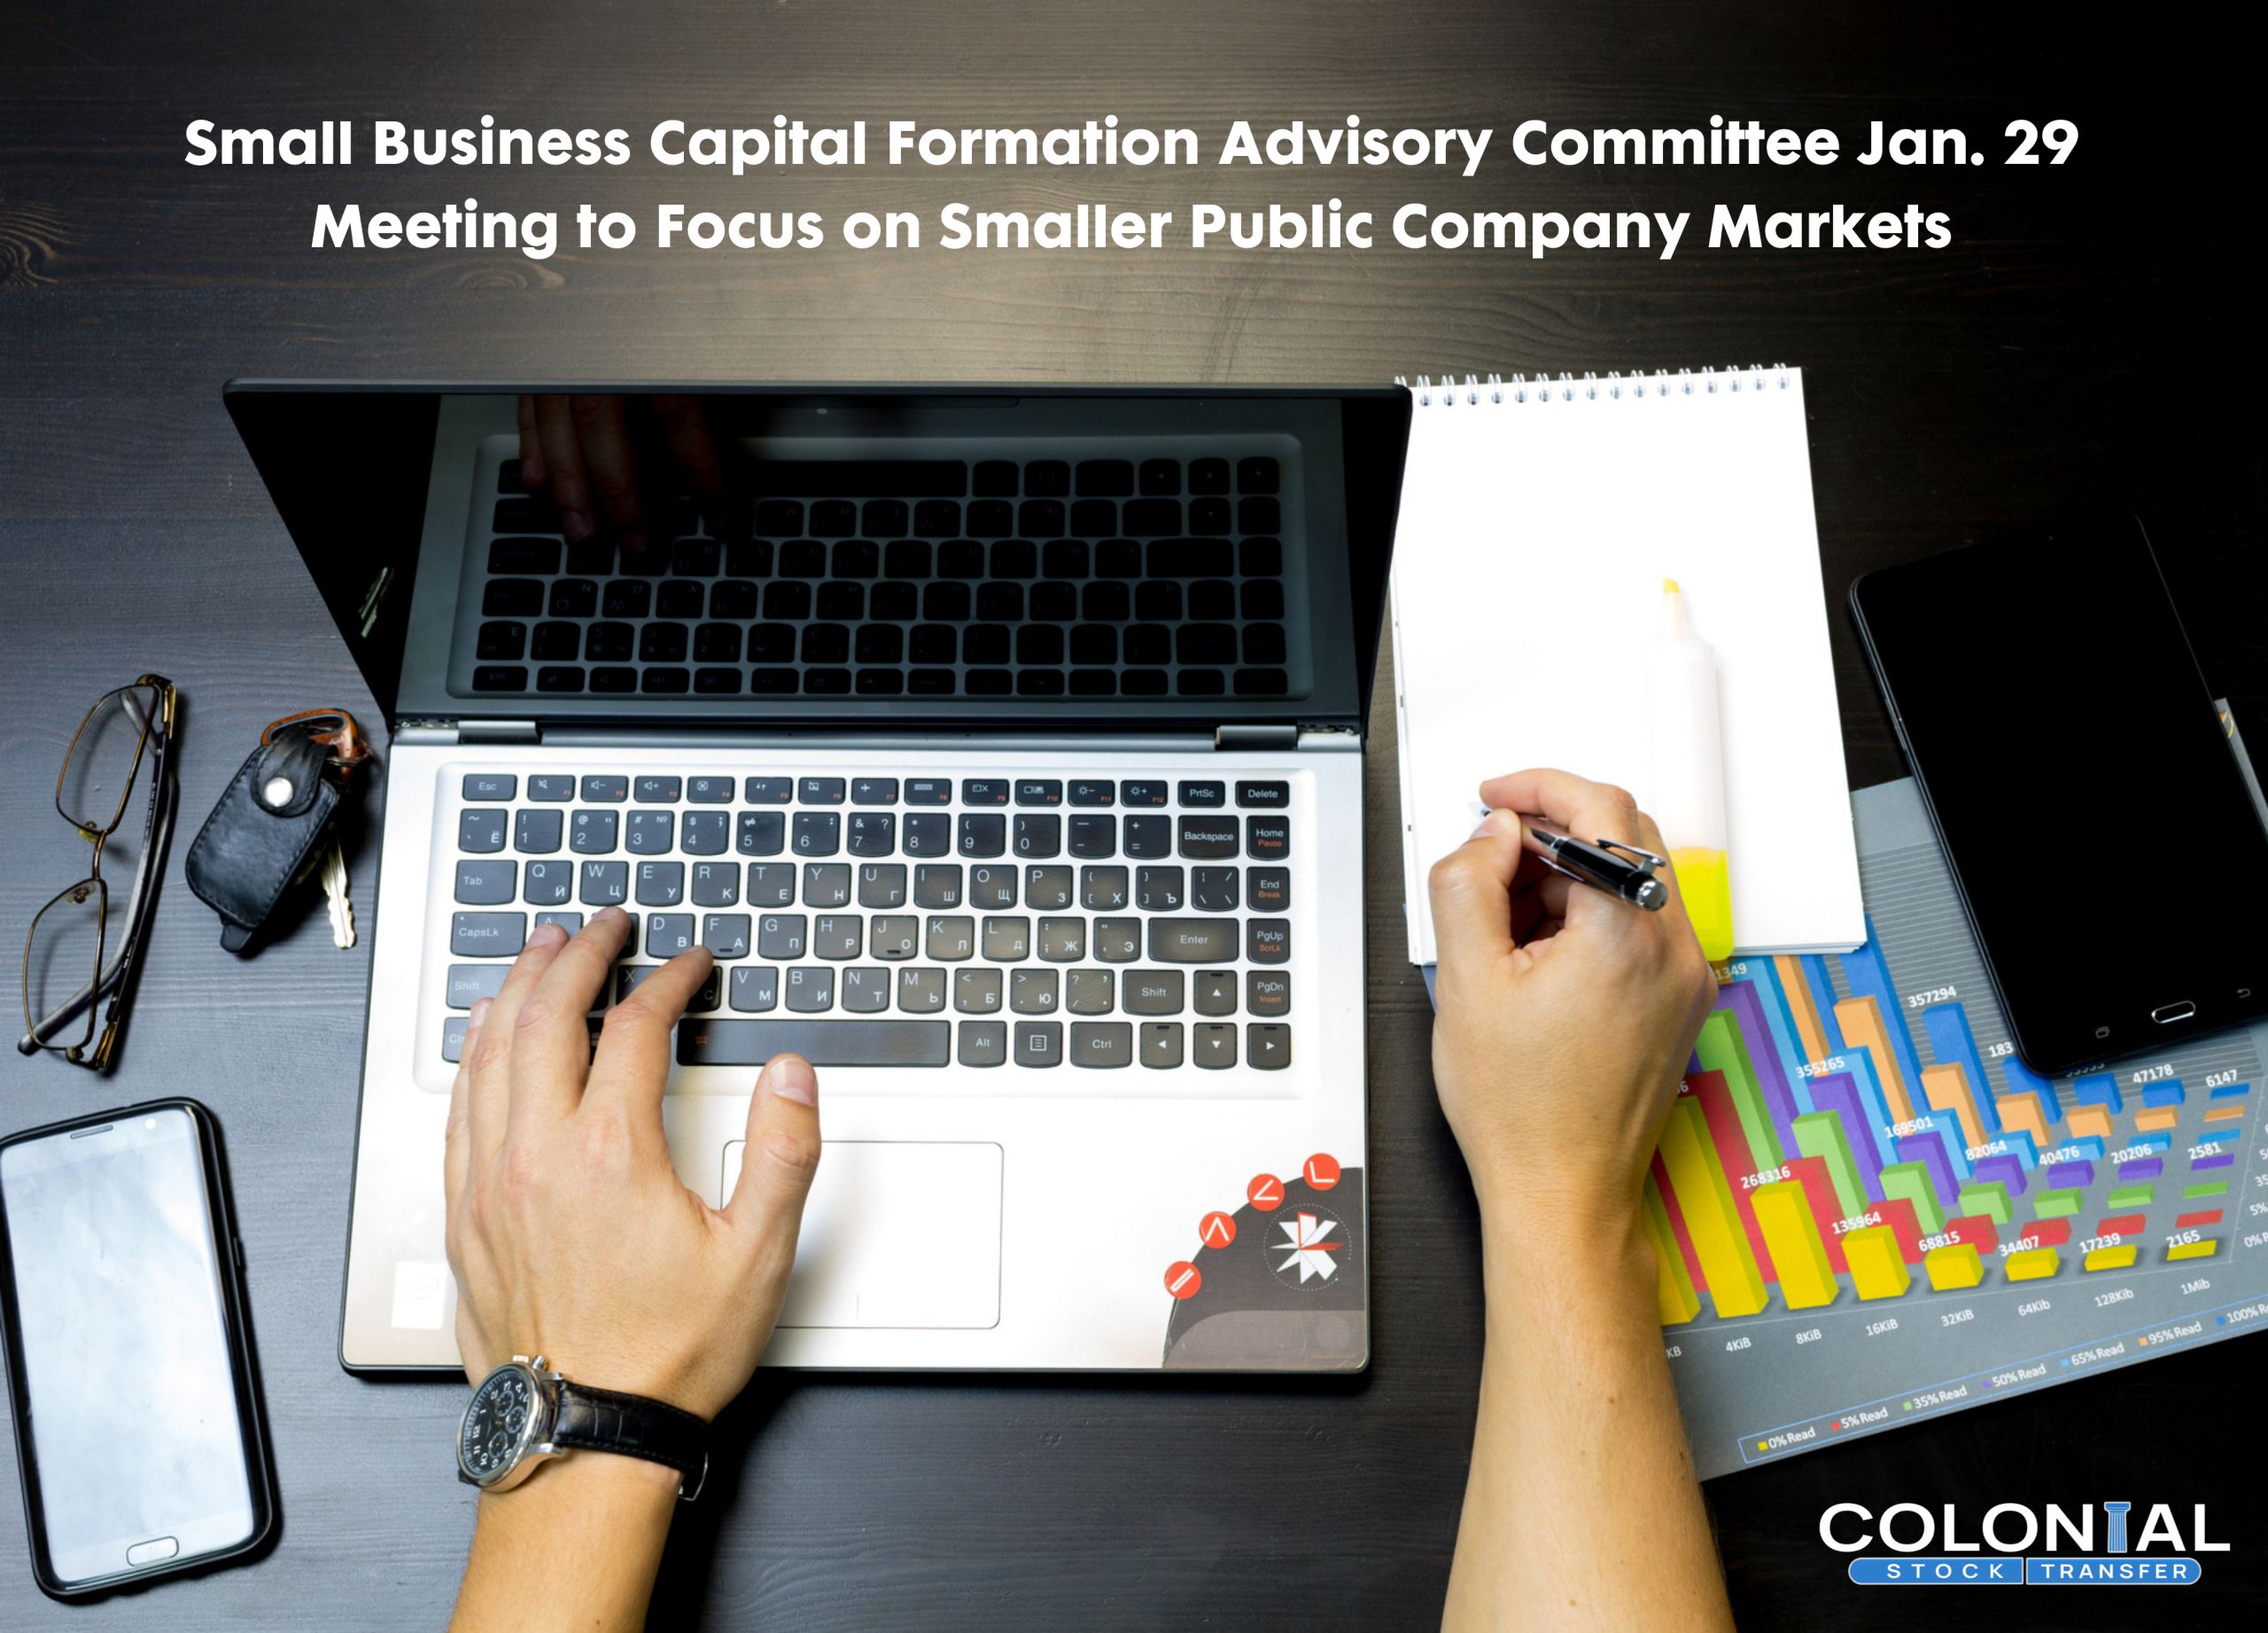 Small Business Capital Formation Advisory Committee Jan. 29 Meeting to Focus on Smaller Public Company Markets